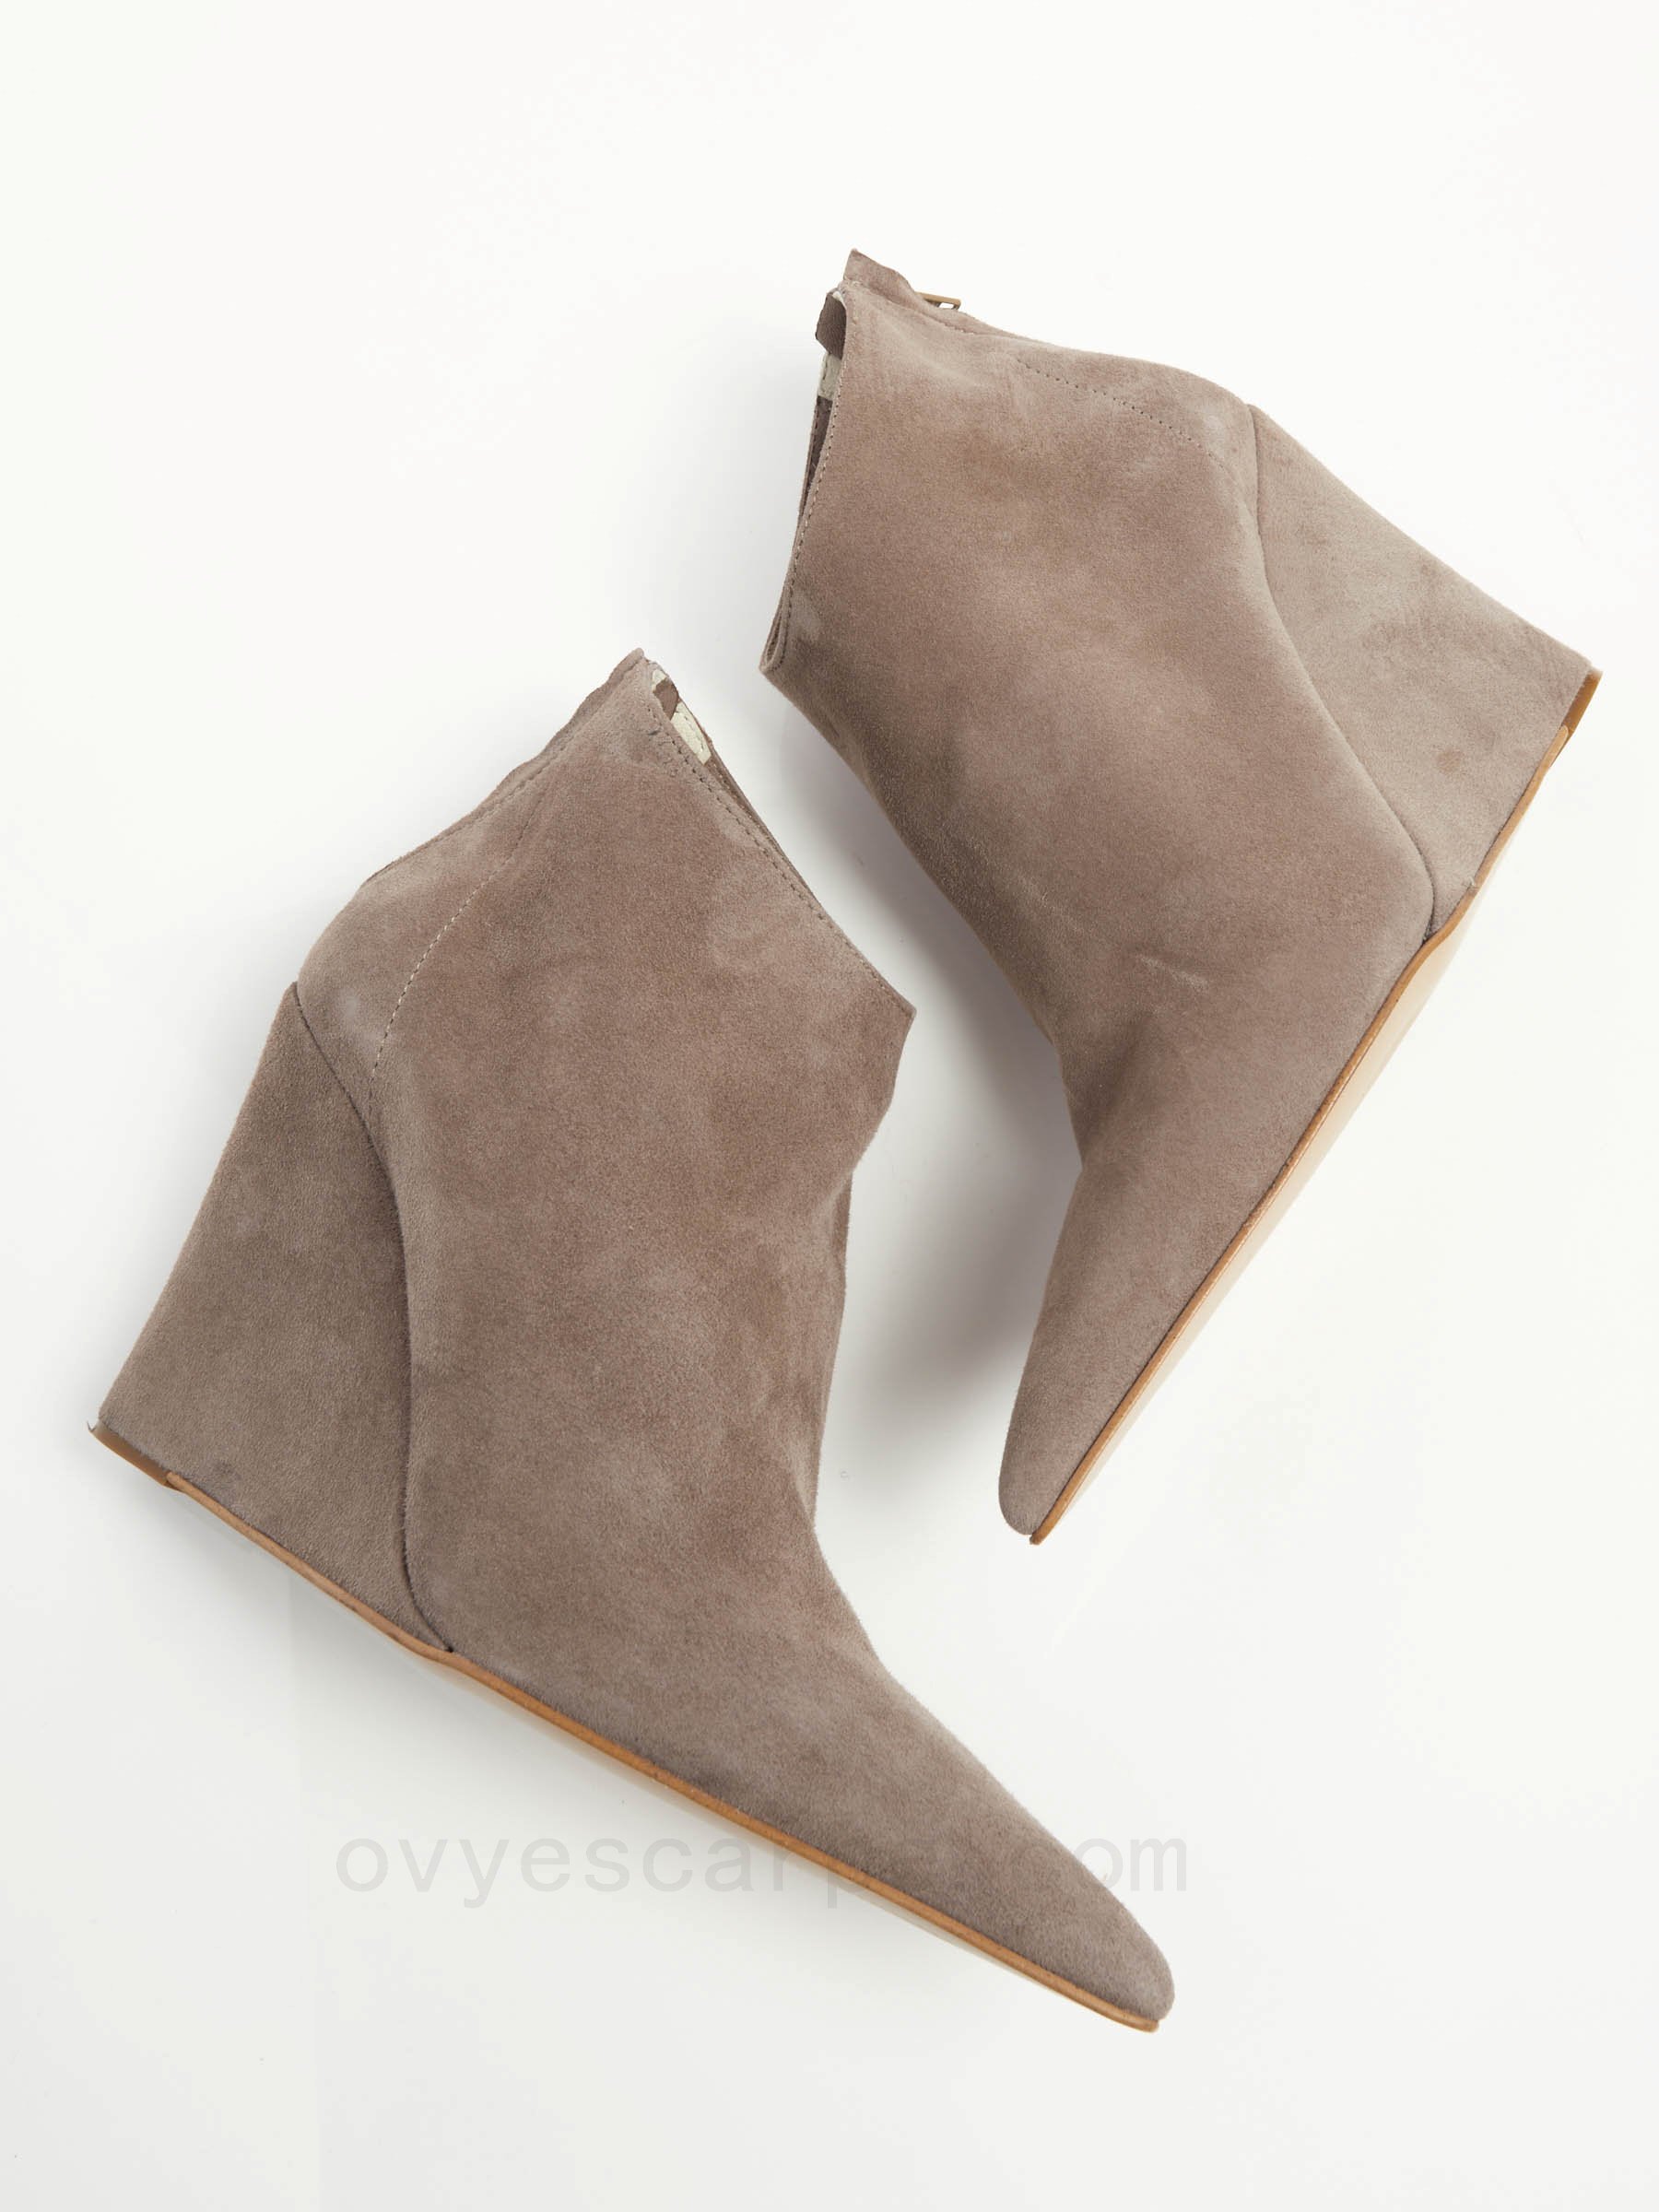 Online Wedge Leather Ankle Boots F08161027-0468 ovye scarpe